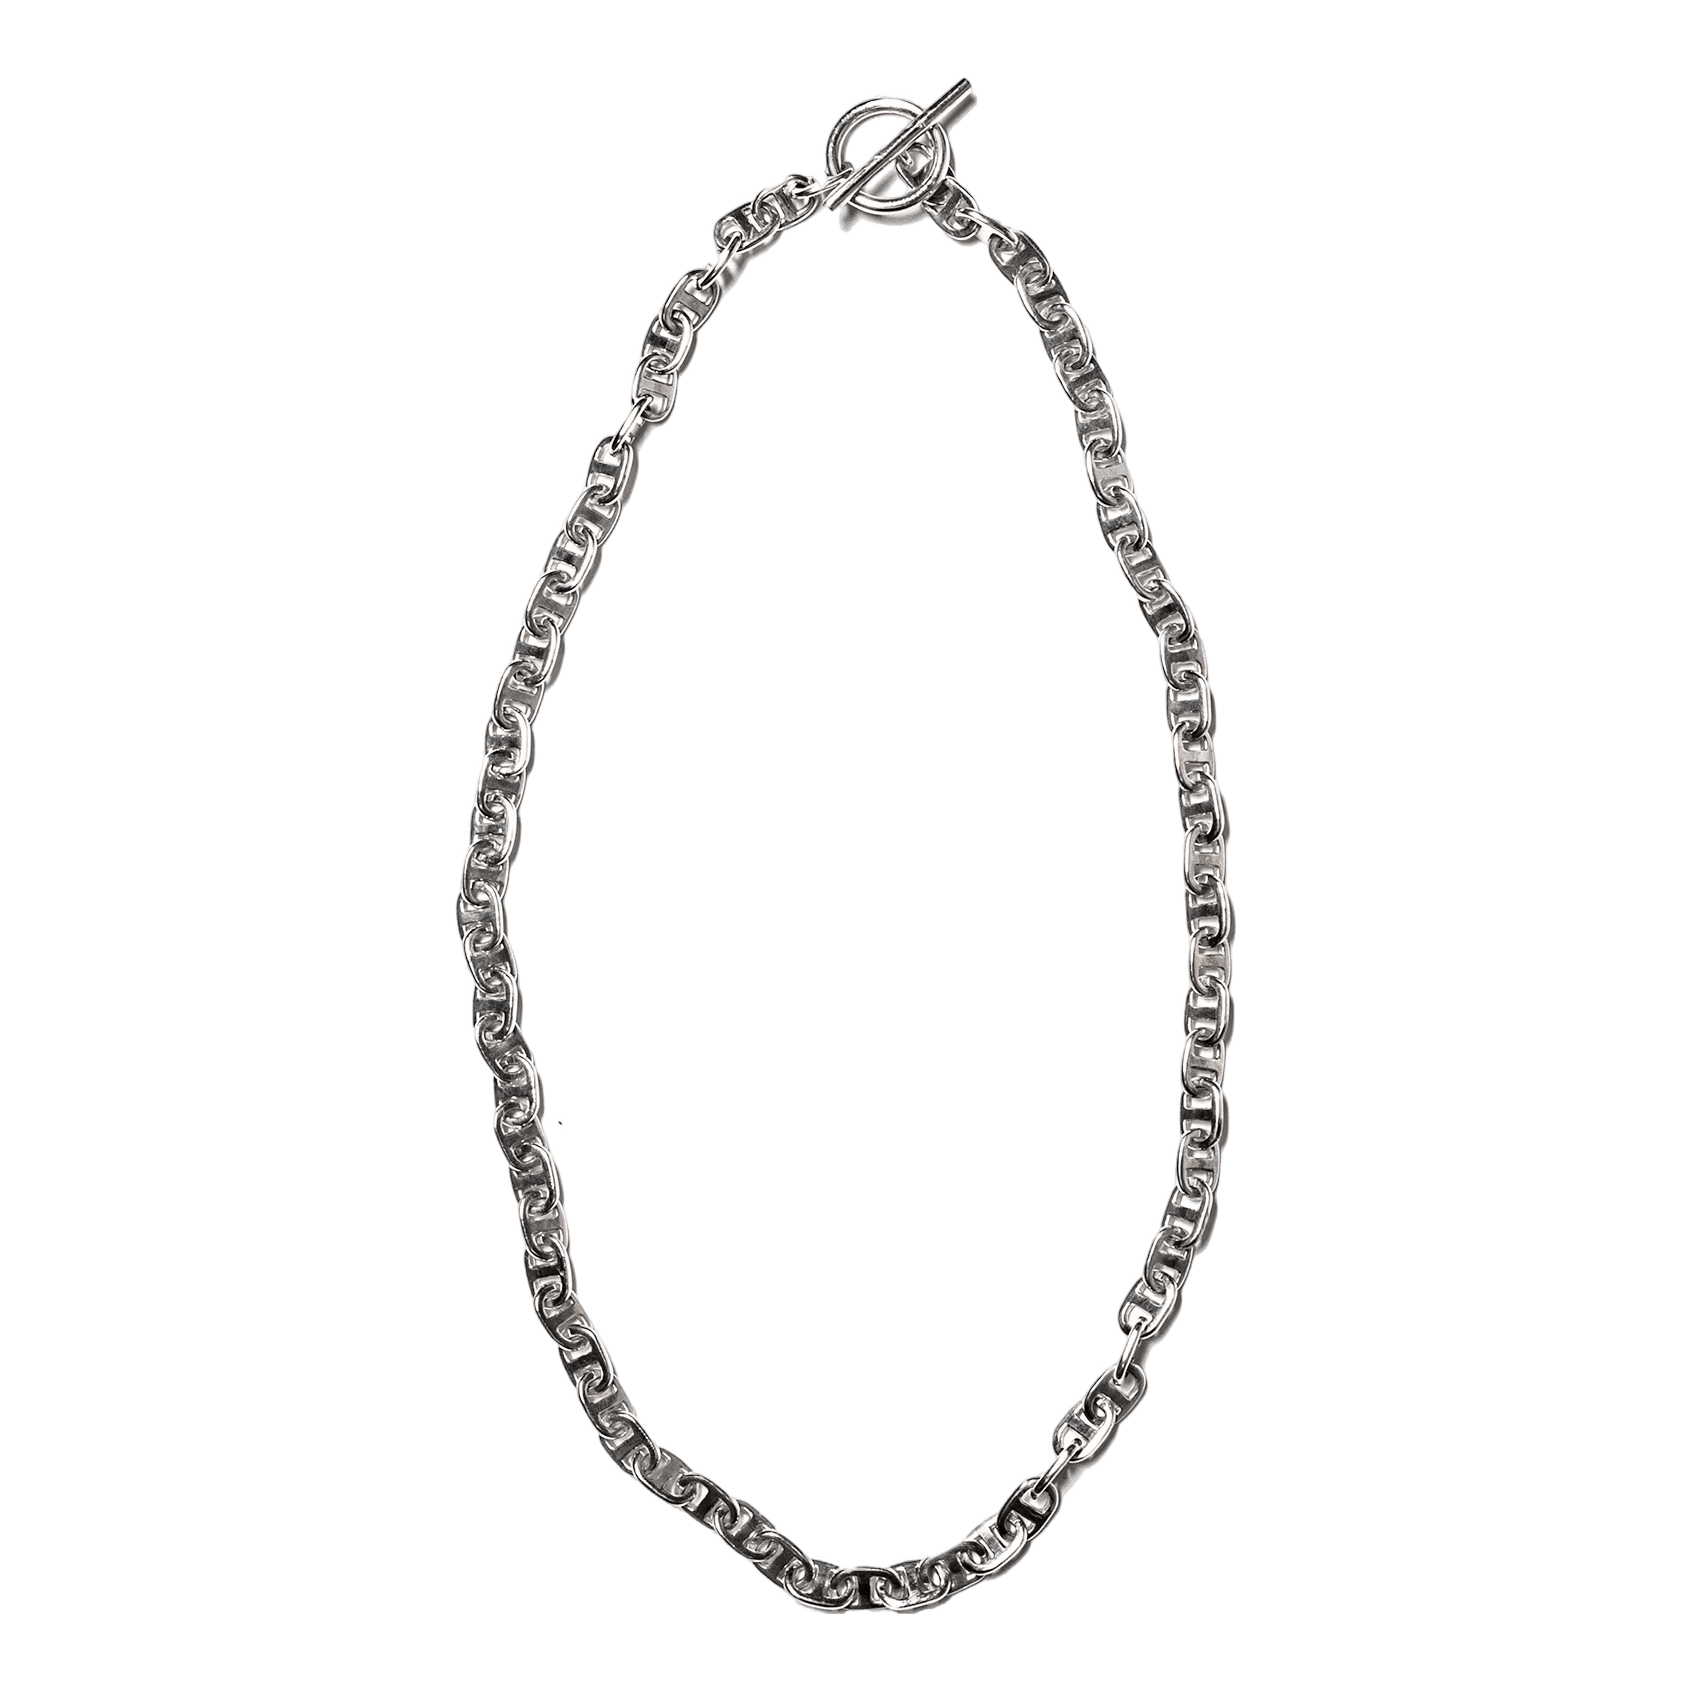 Chain Link Necklace 7mm Silver 925